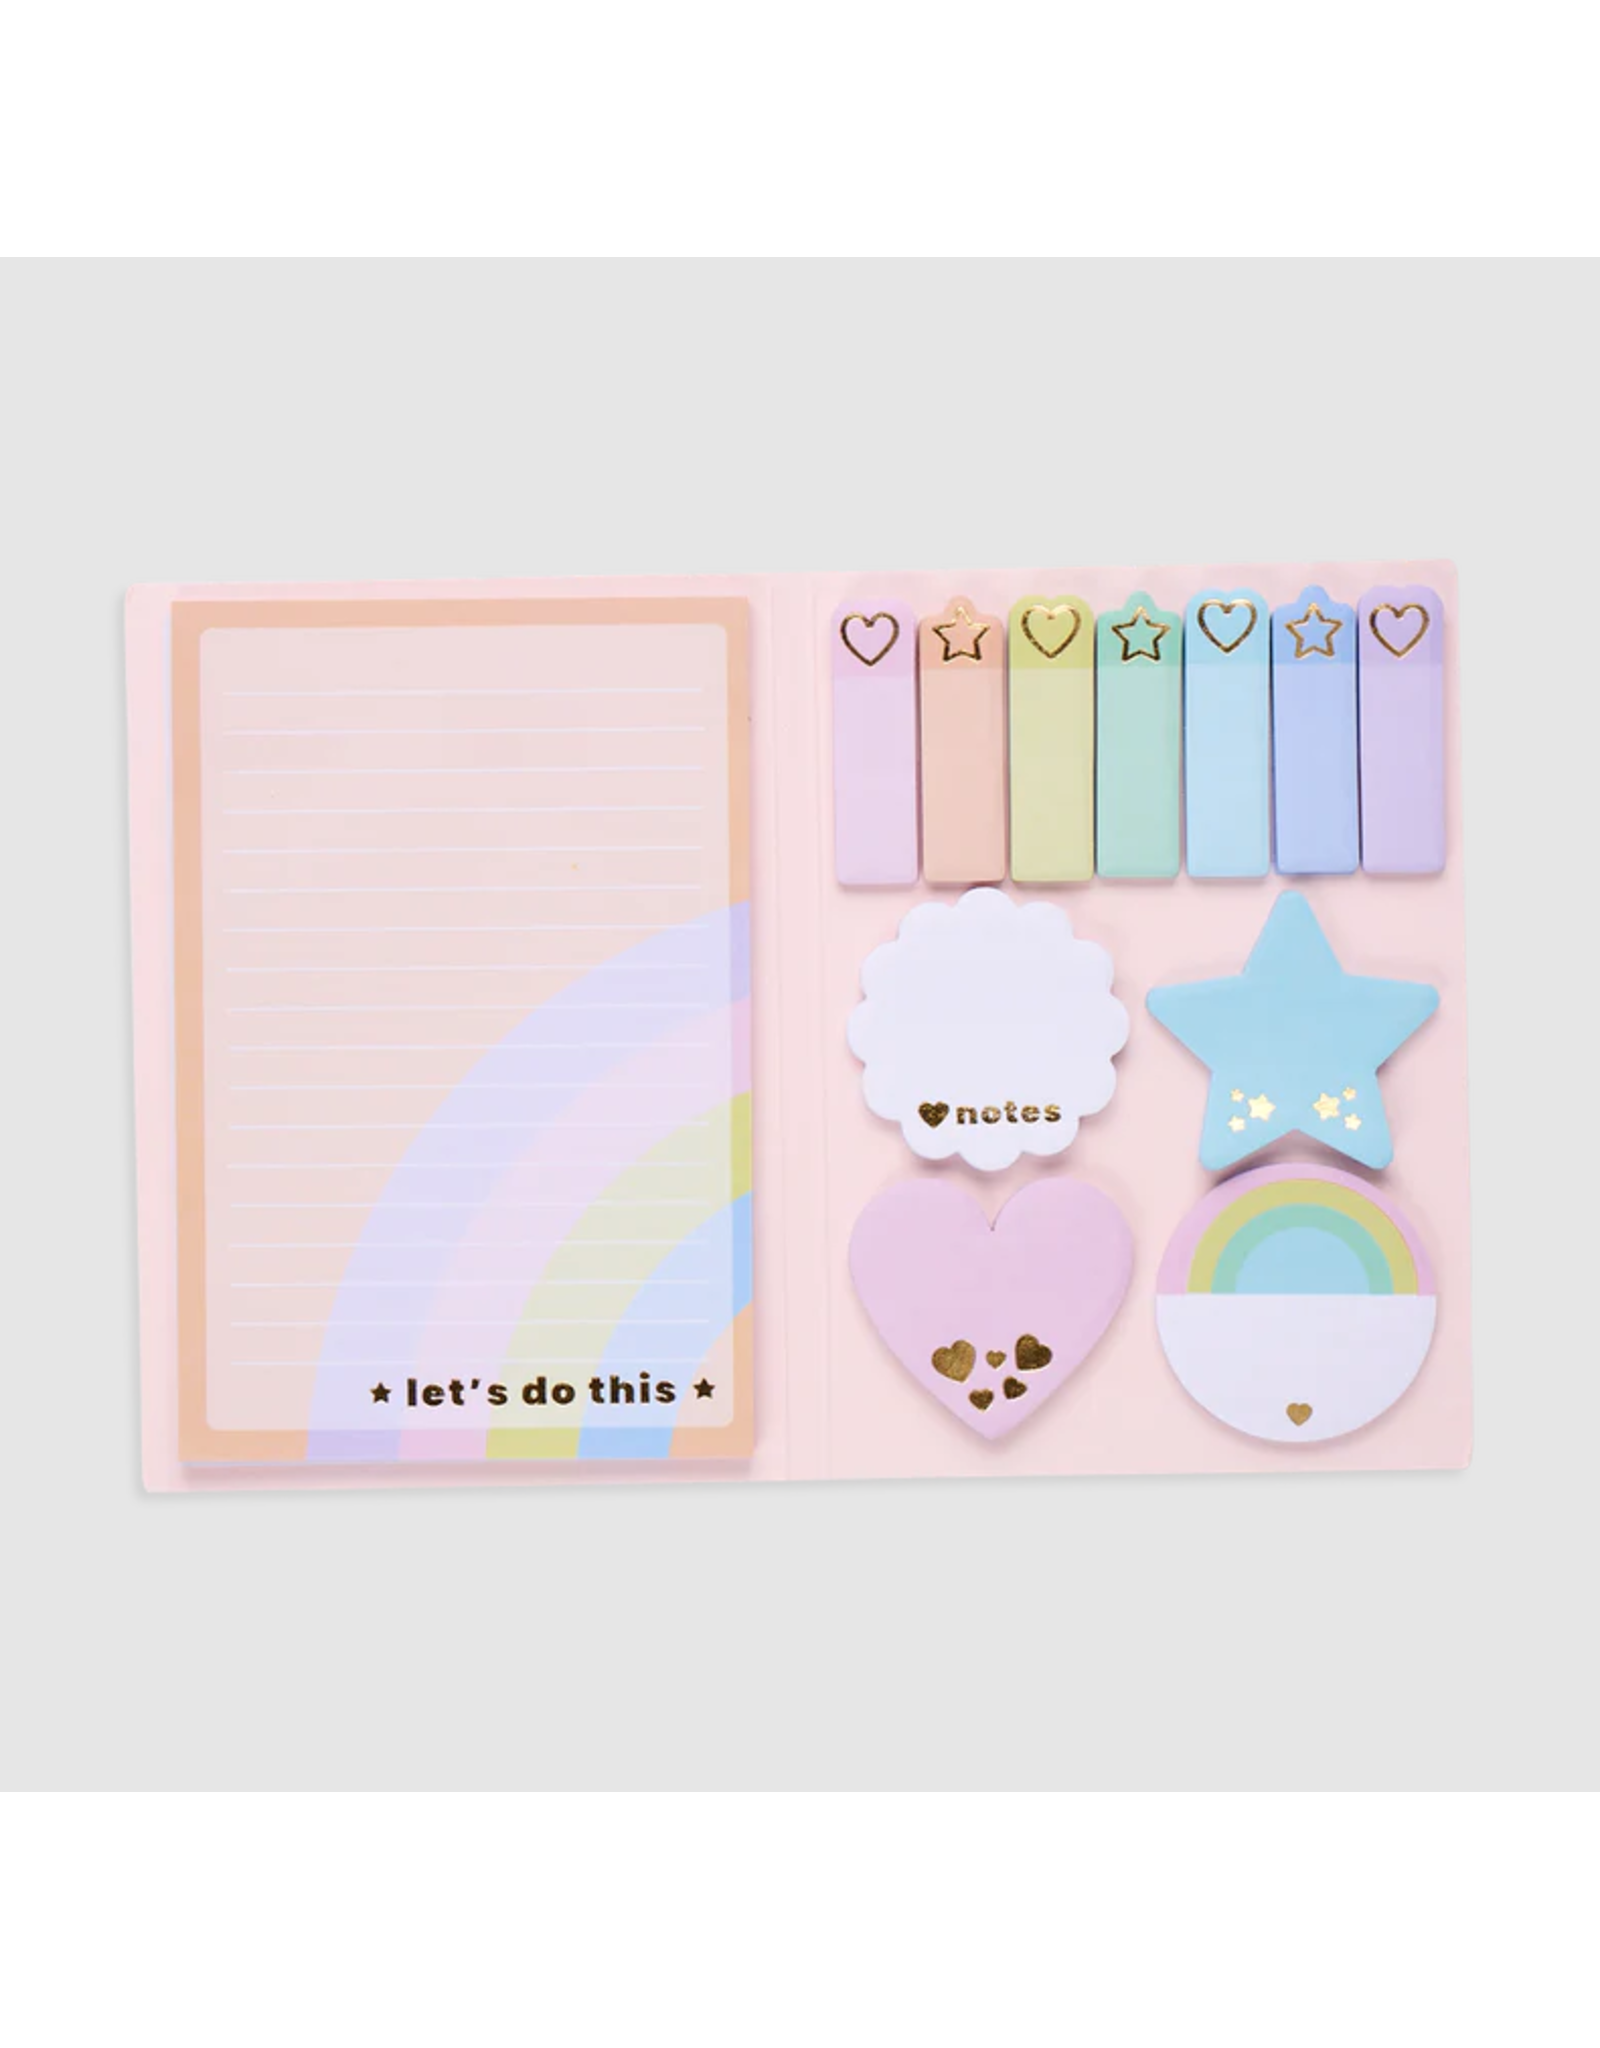 Ooly Side Notes Pastel Rainbow Style